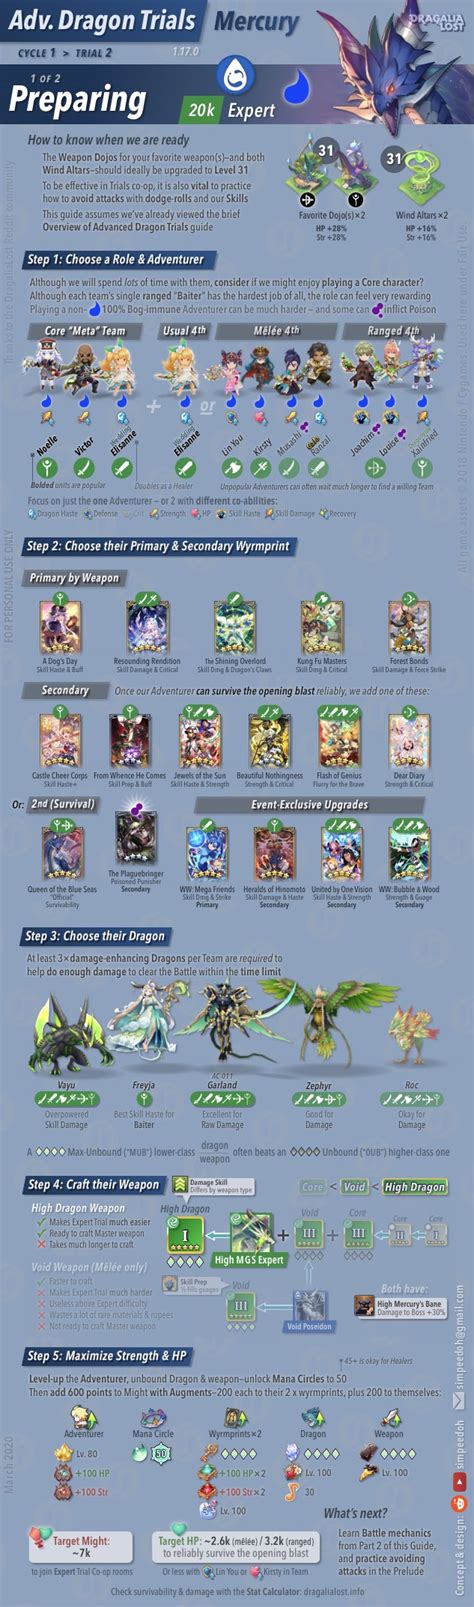 This is the fight's initial hp check blast. Expert Adv. High Dragon Trial Guides (OC) : DragaliaLost